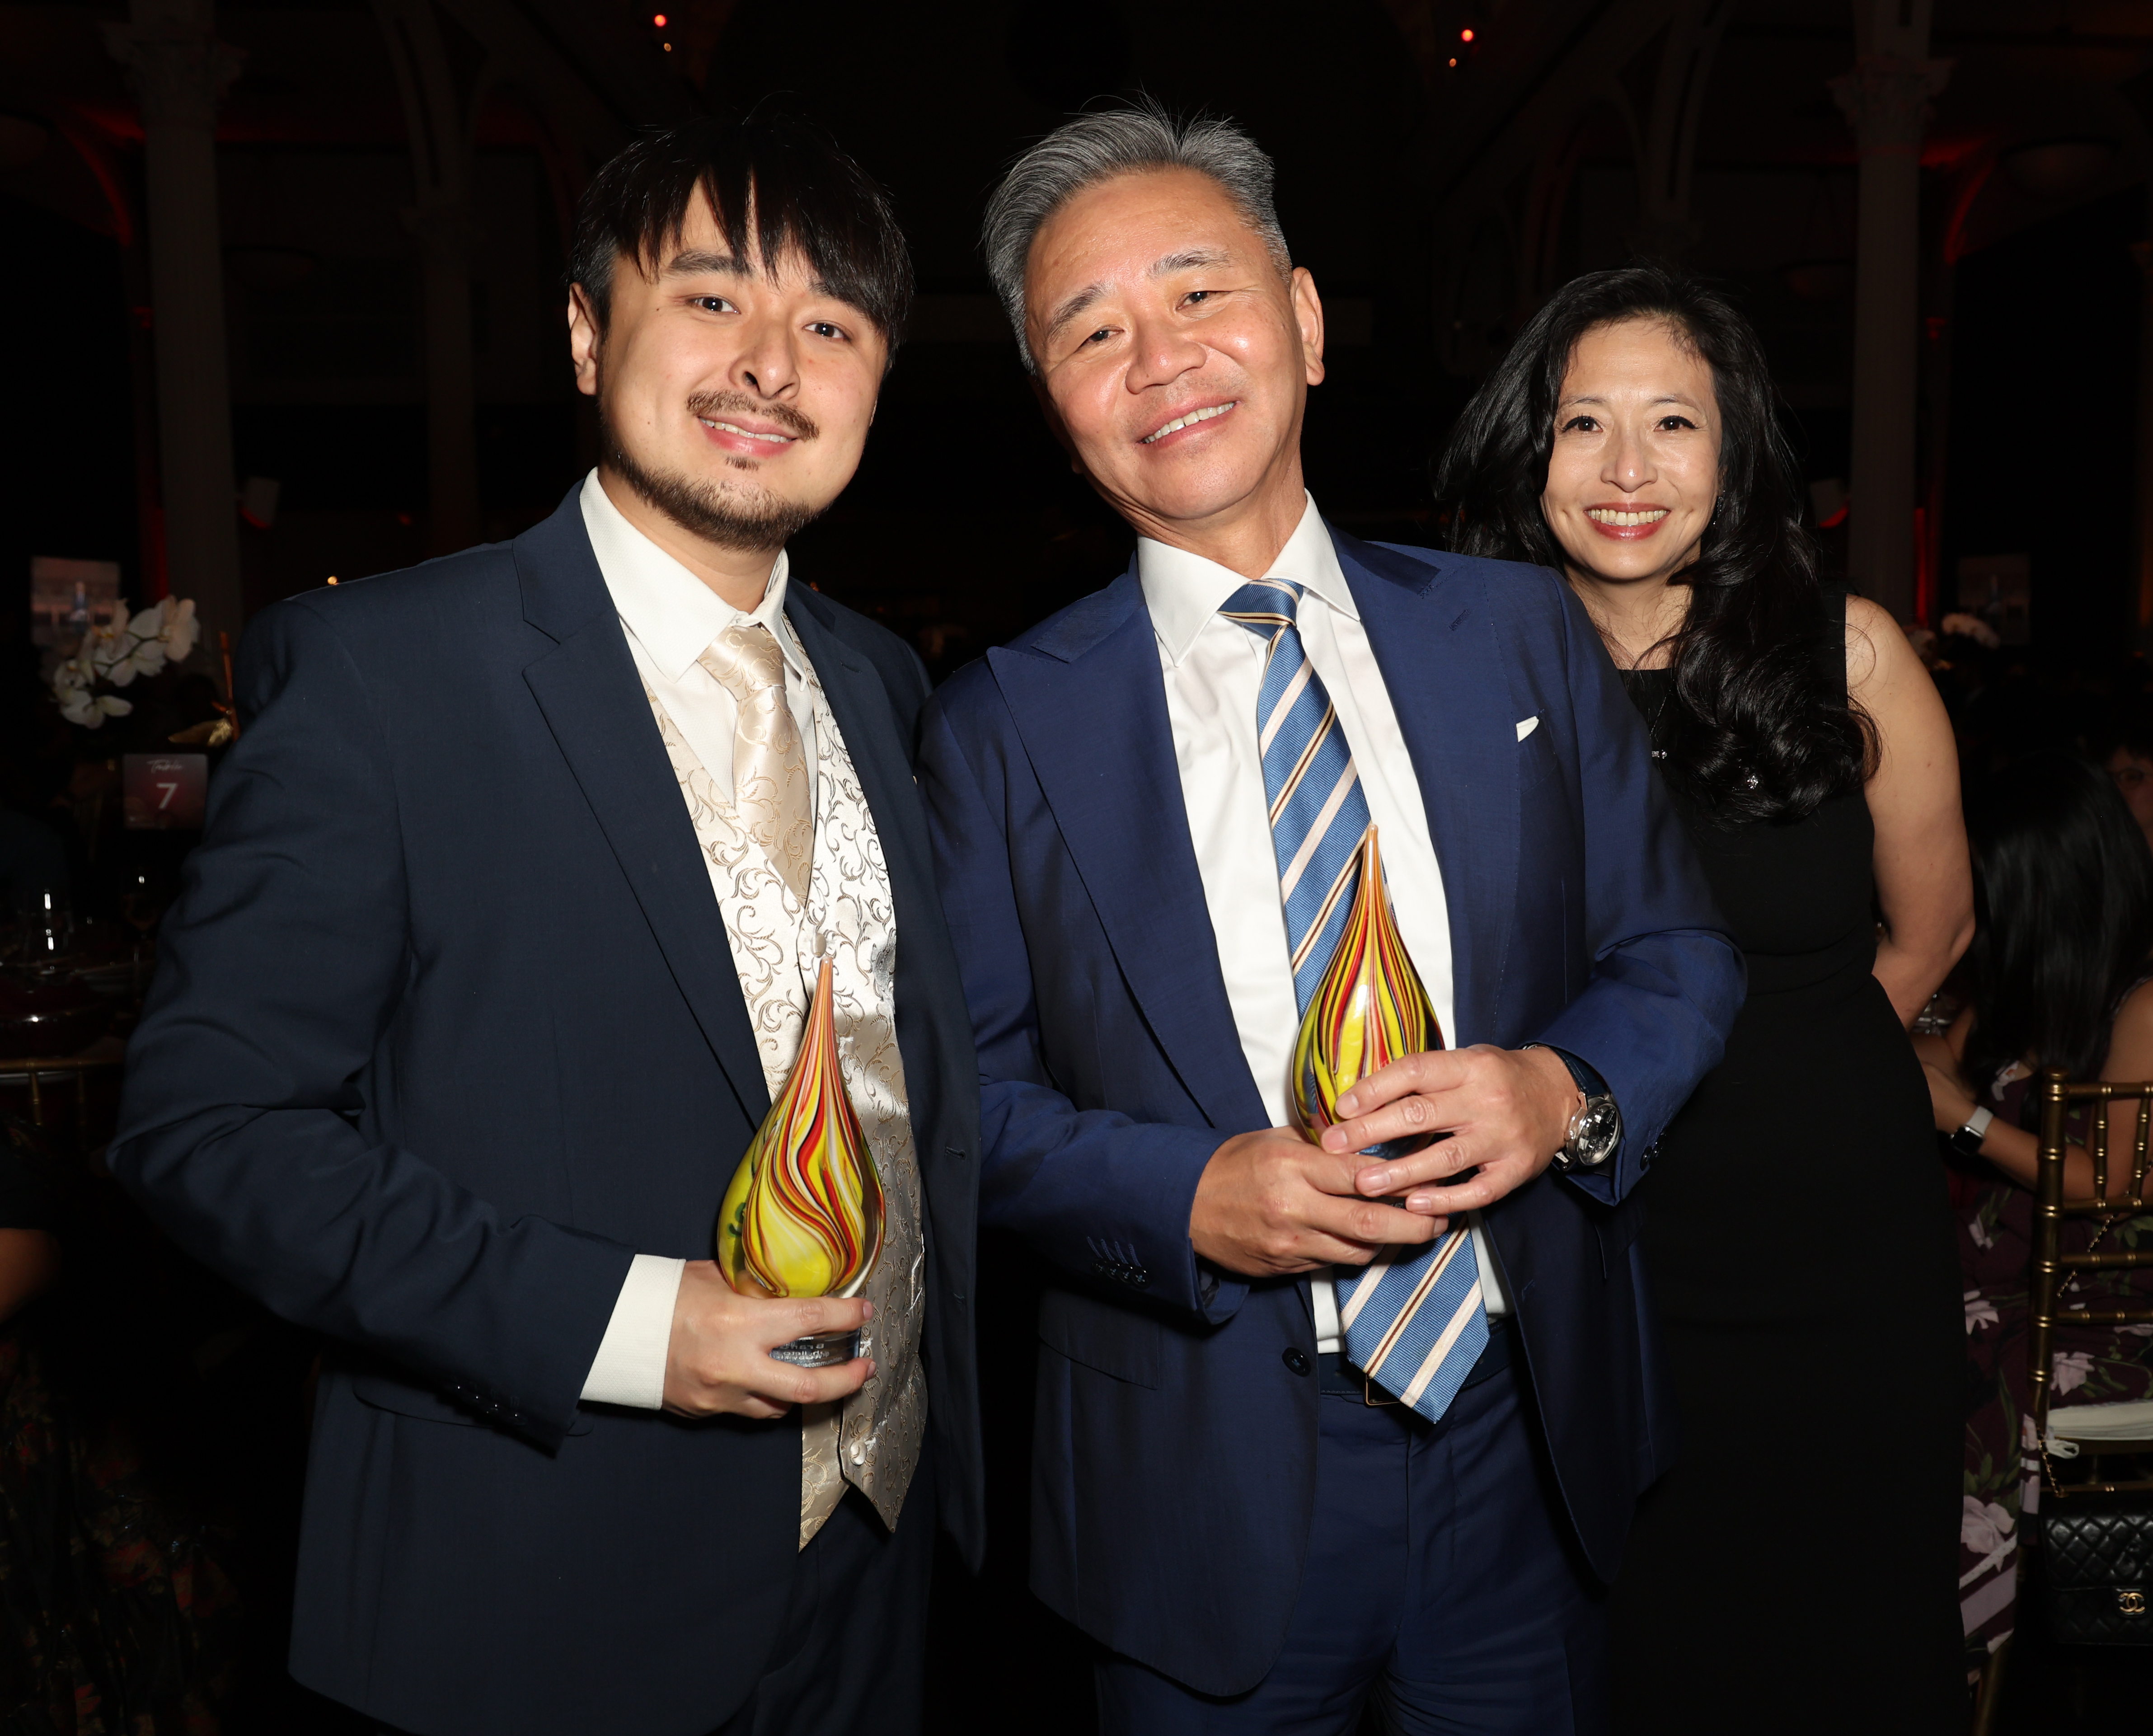 Photo showing Brandon Tsay with other award winners at a gala